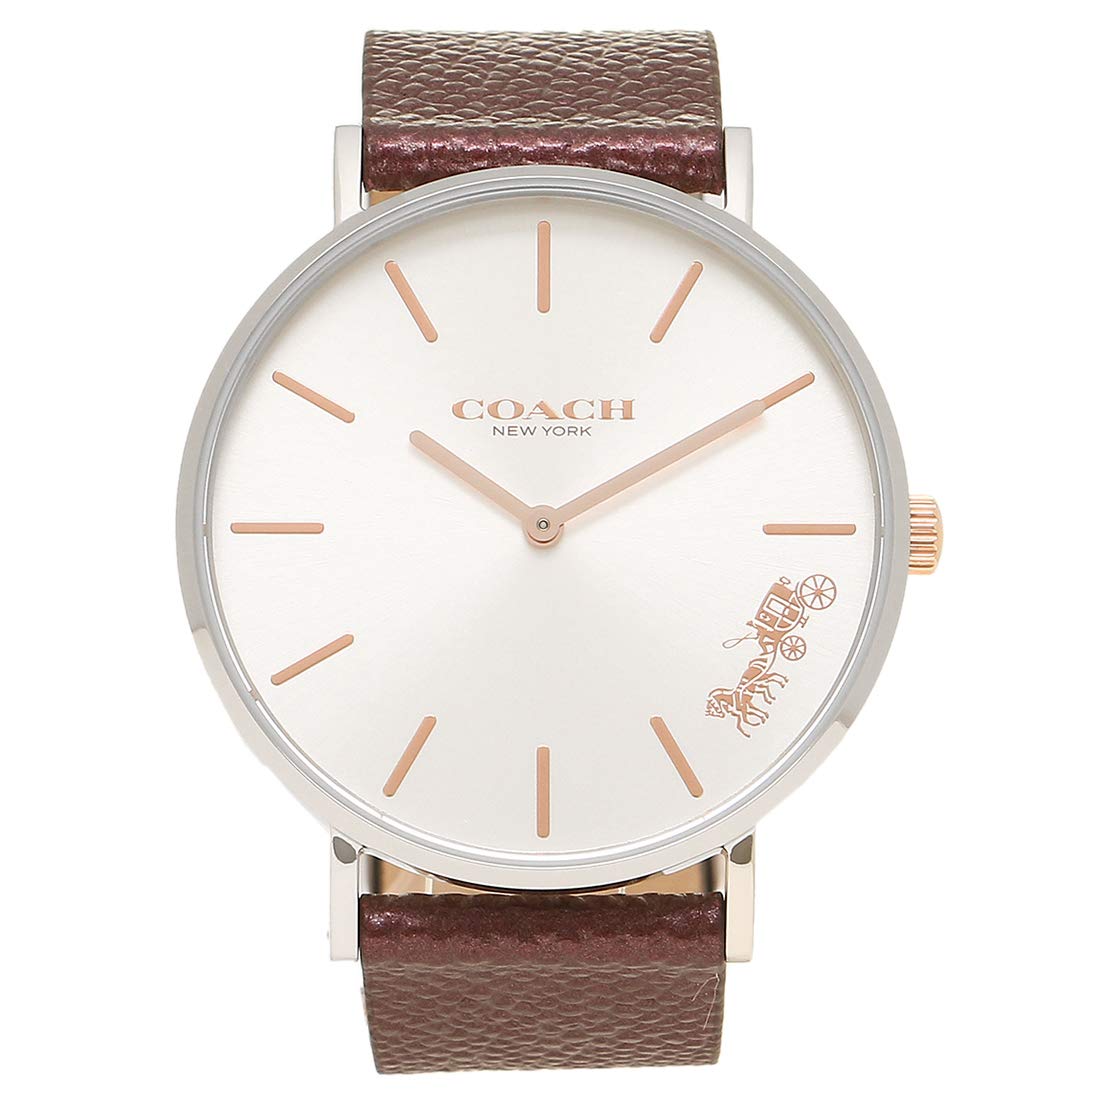 Coach Perry White Dial Brown Leather Strap Watch for Women - 14503154